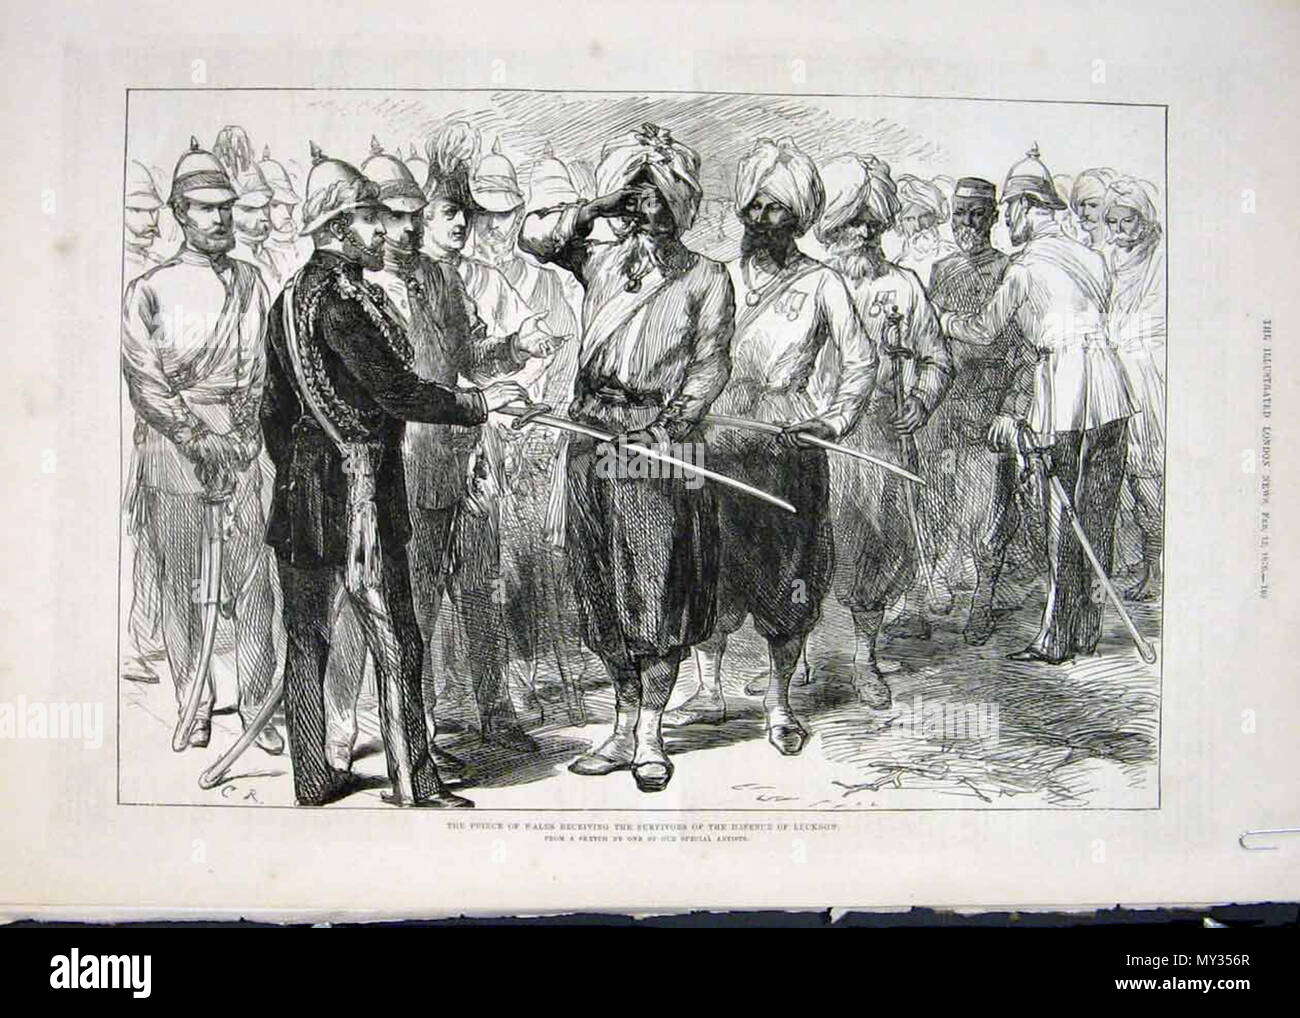 . English: The Prince of Wales honors loyal veterans of the siege of Lucknow; from the Illustrated London News, 1876 . 1876. Illustrated London News 522 The Prince of Wales - Lucknow Stock Photo